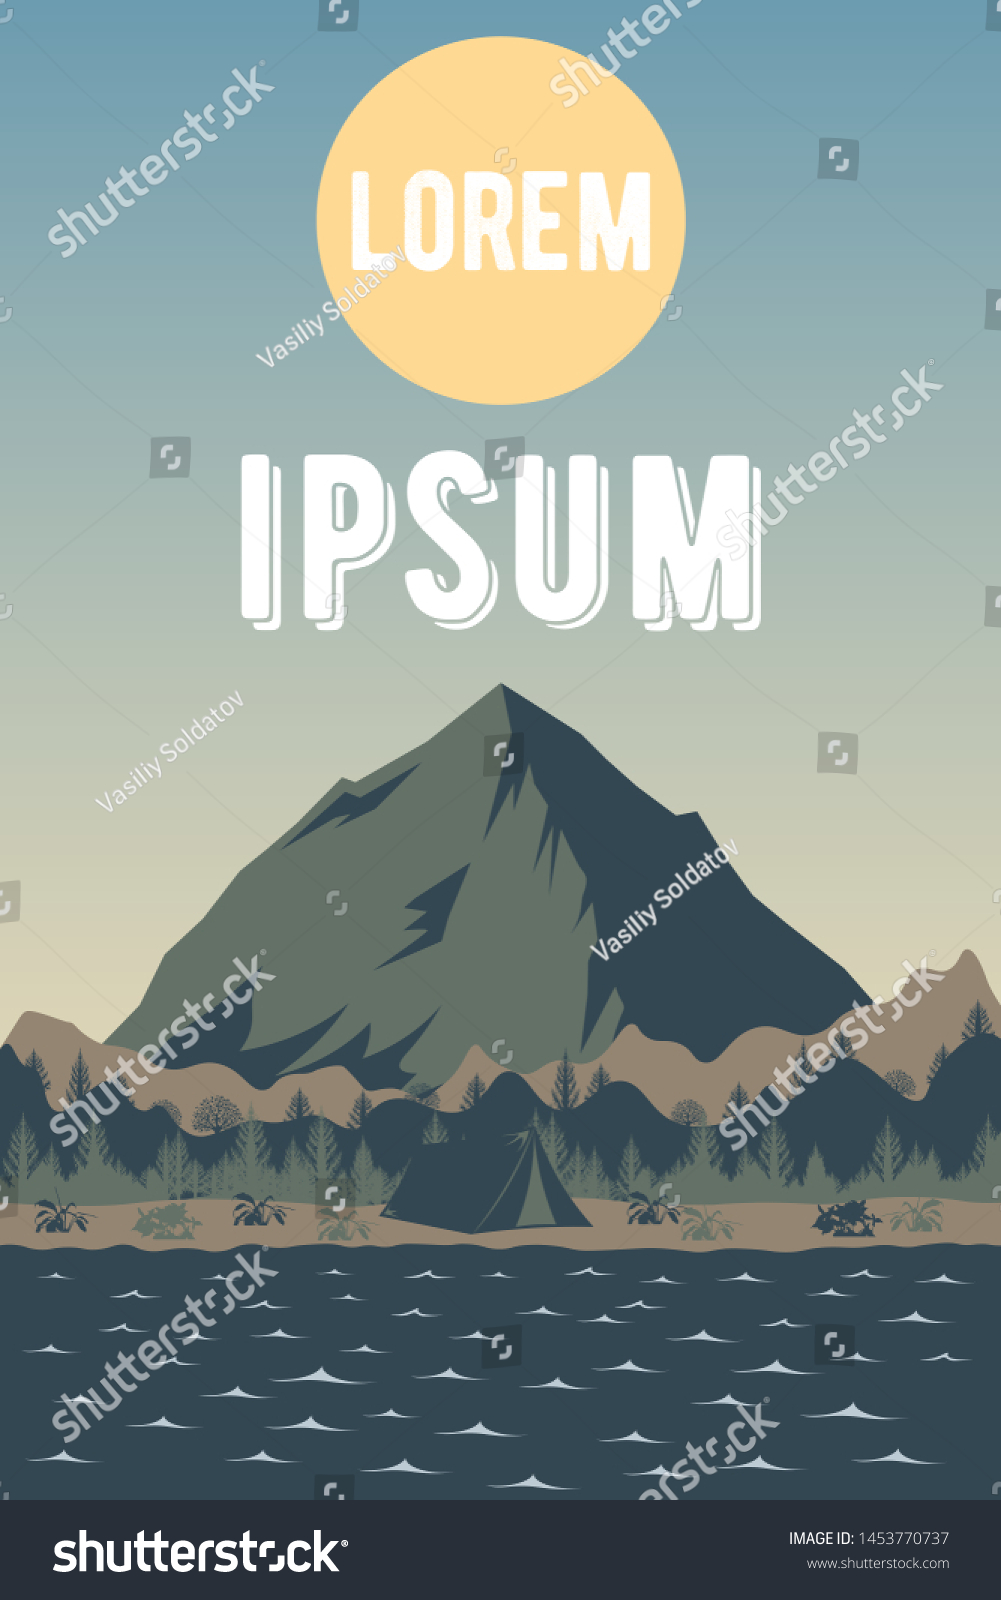 SVG of Poster template for a trip to the lake. Natural scenery with river, forest, hills, sun over a large mountain and a camp tent on the shore. Pattern with the travel landscape and outdoor recreation.  svg